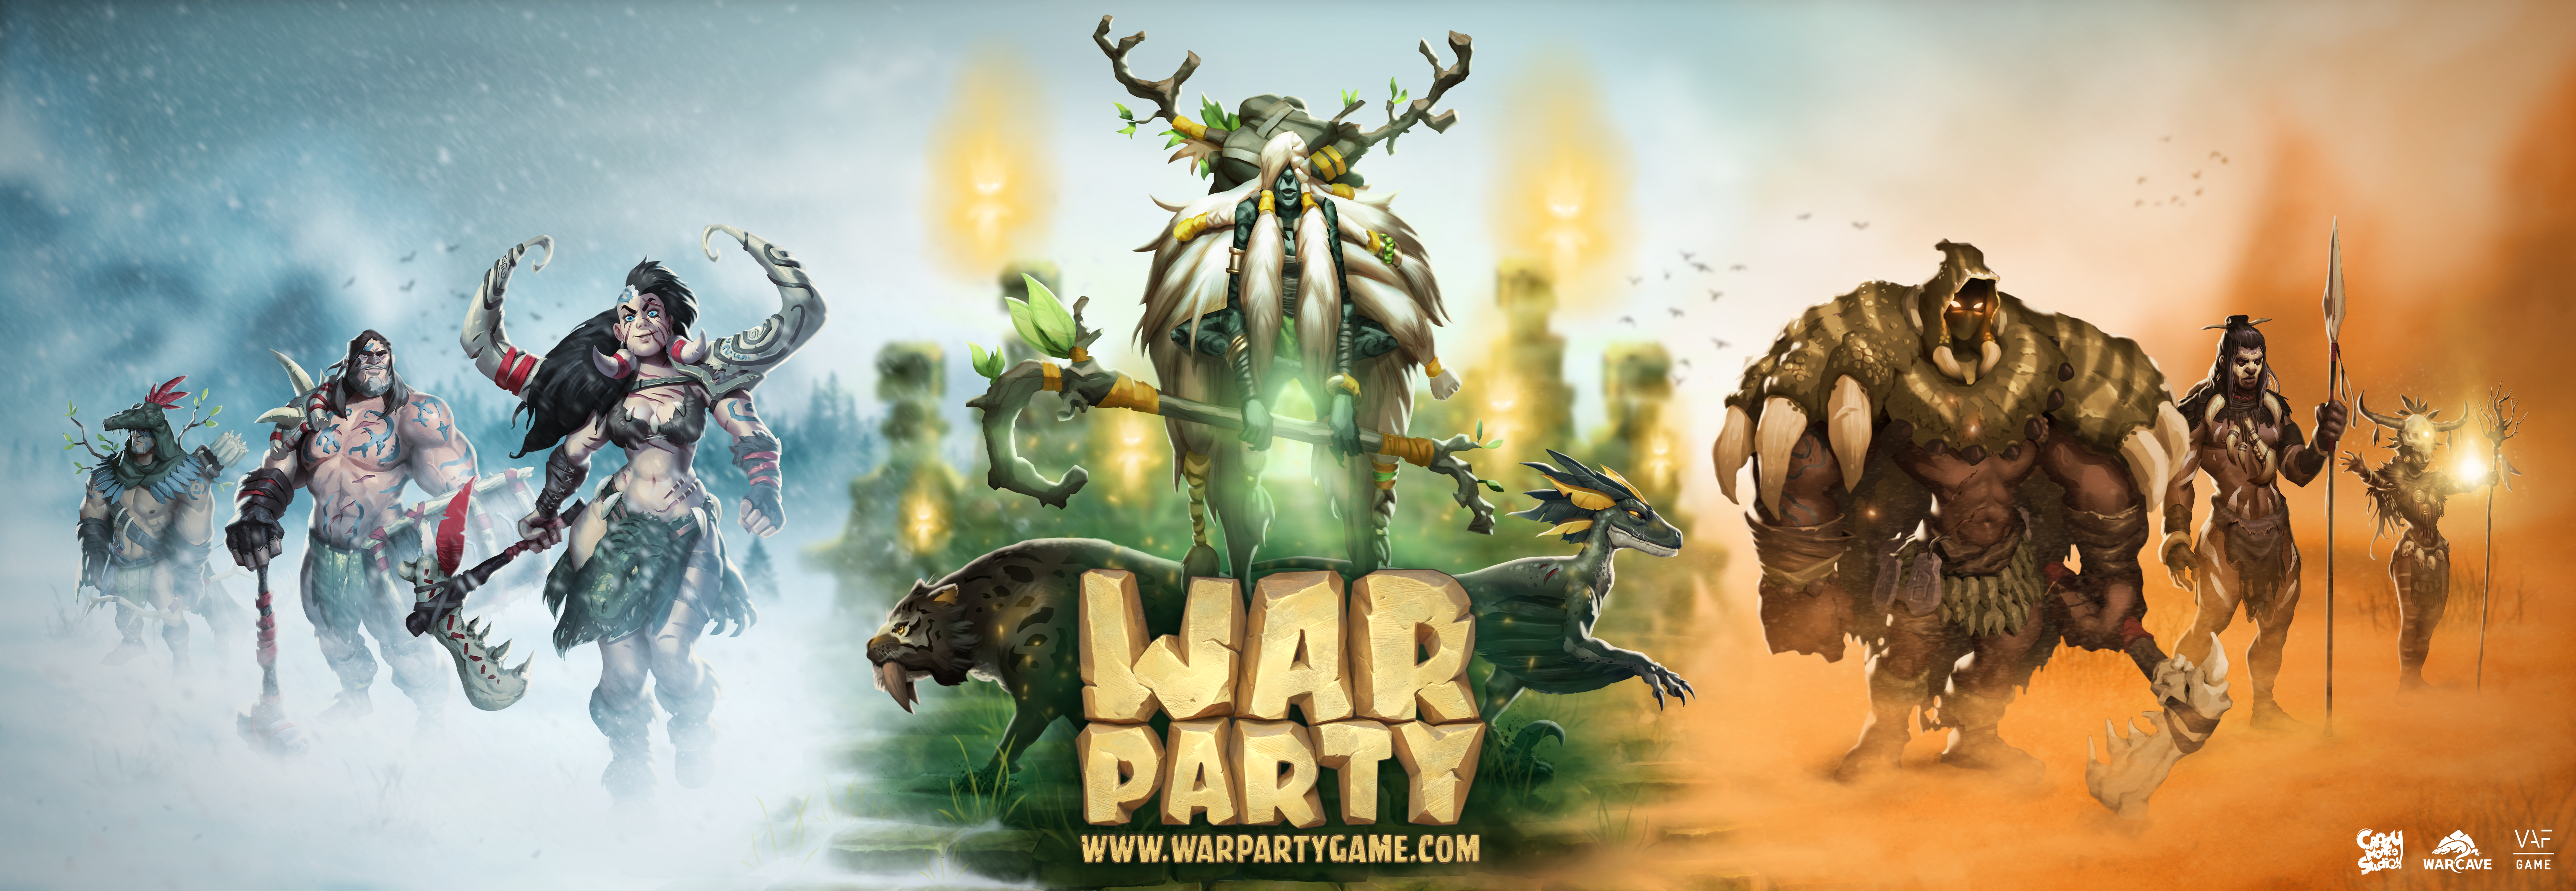 Warparty_banner5mx137cm.png